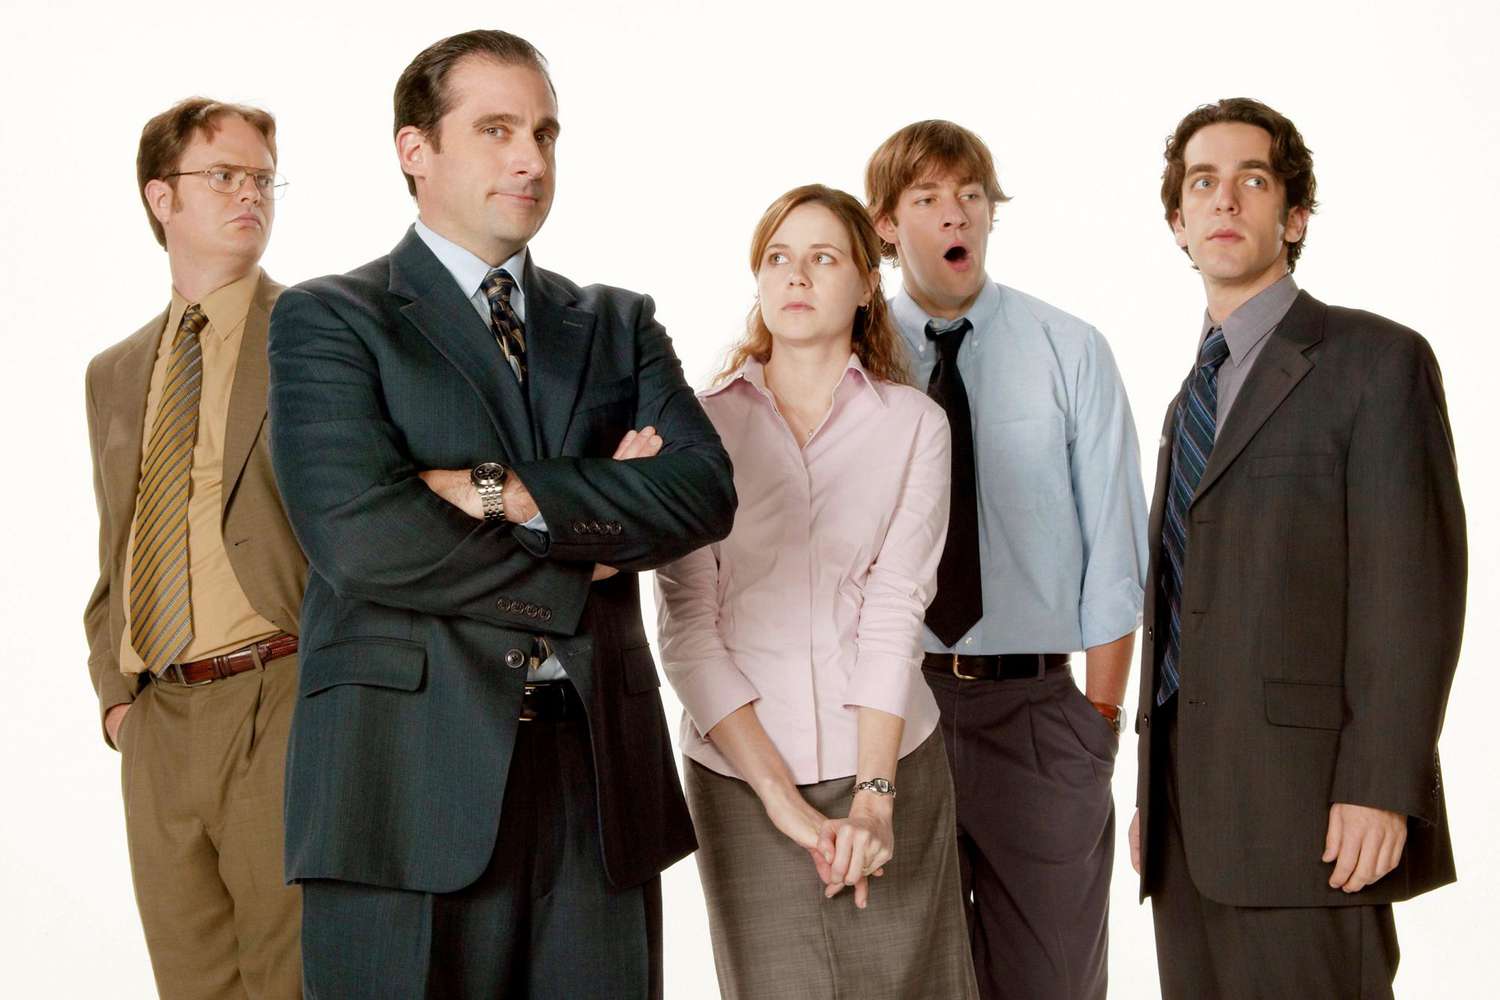 'The Office' cast Where are they now?